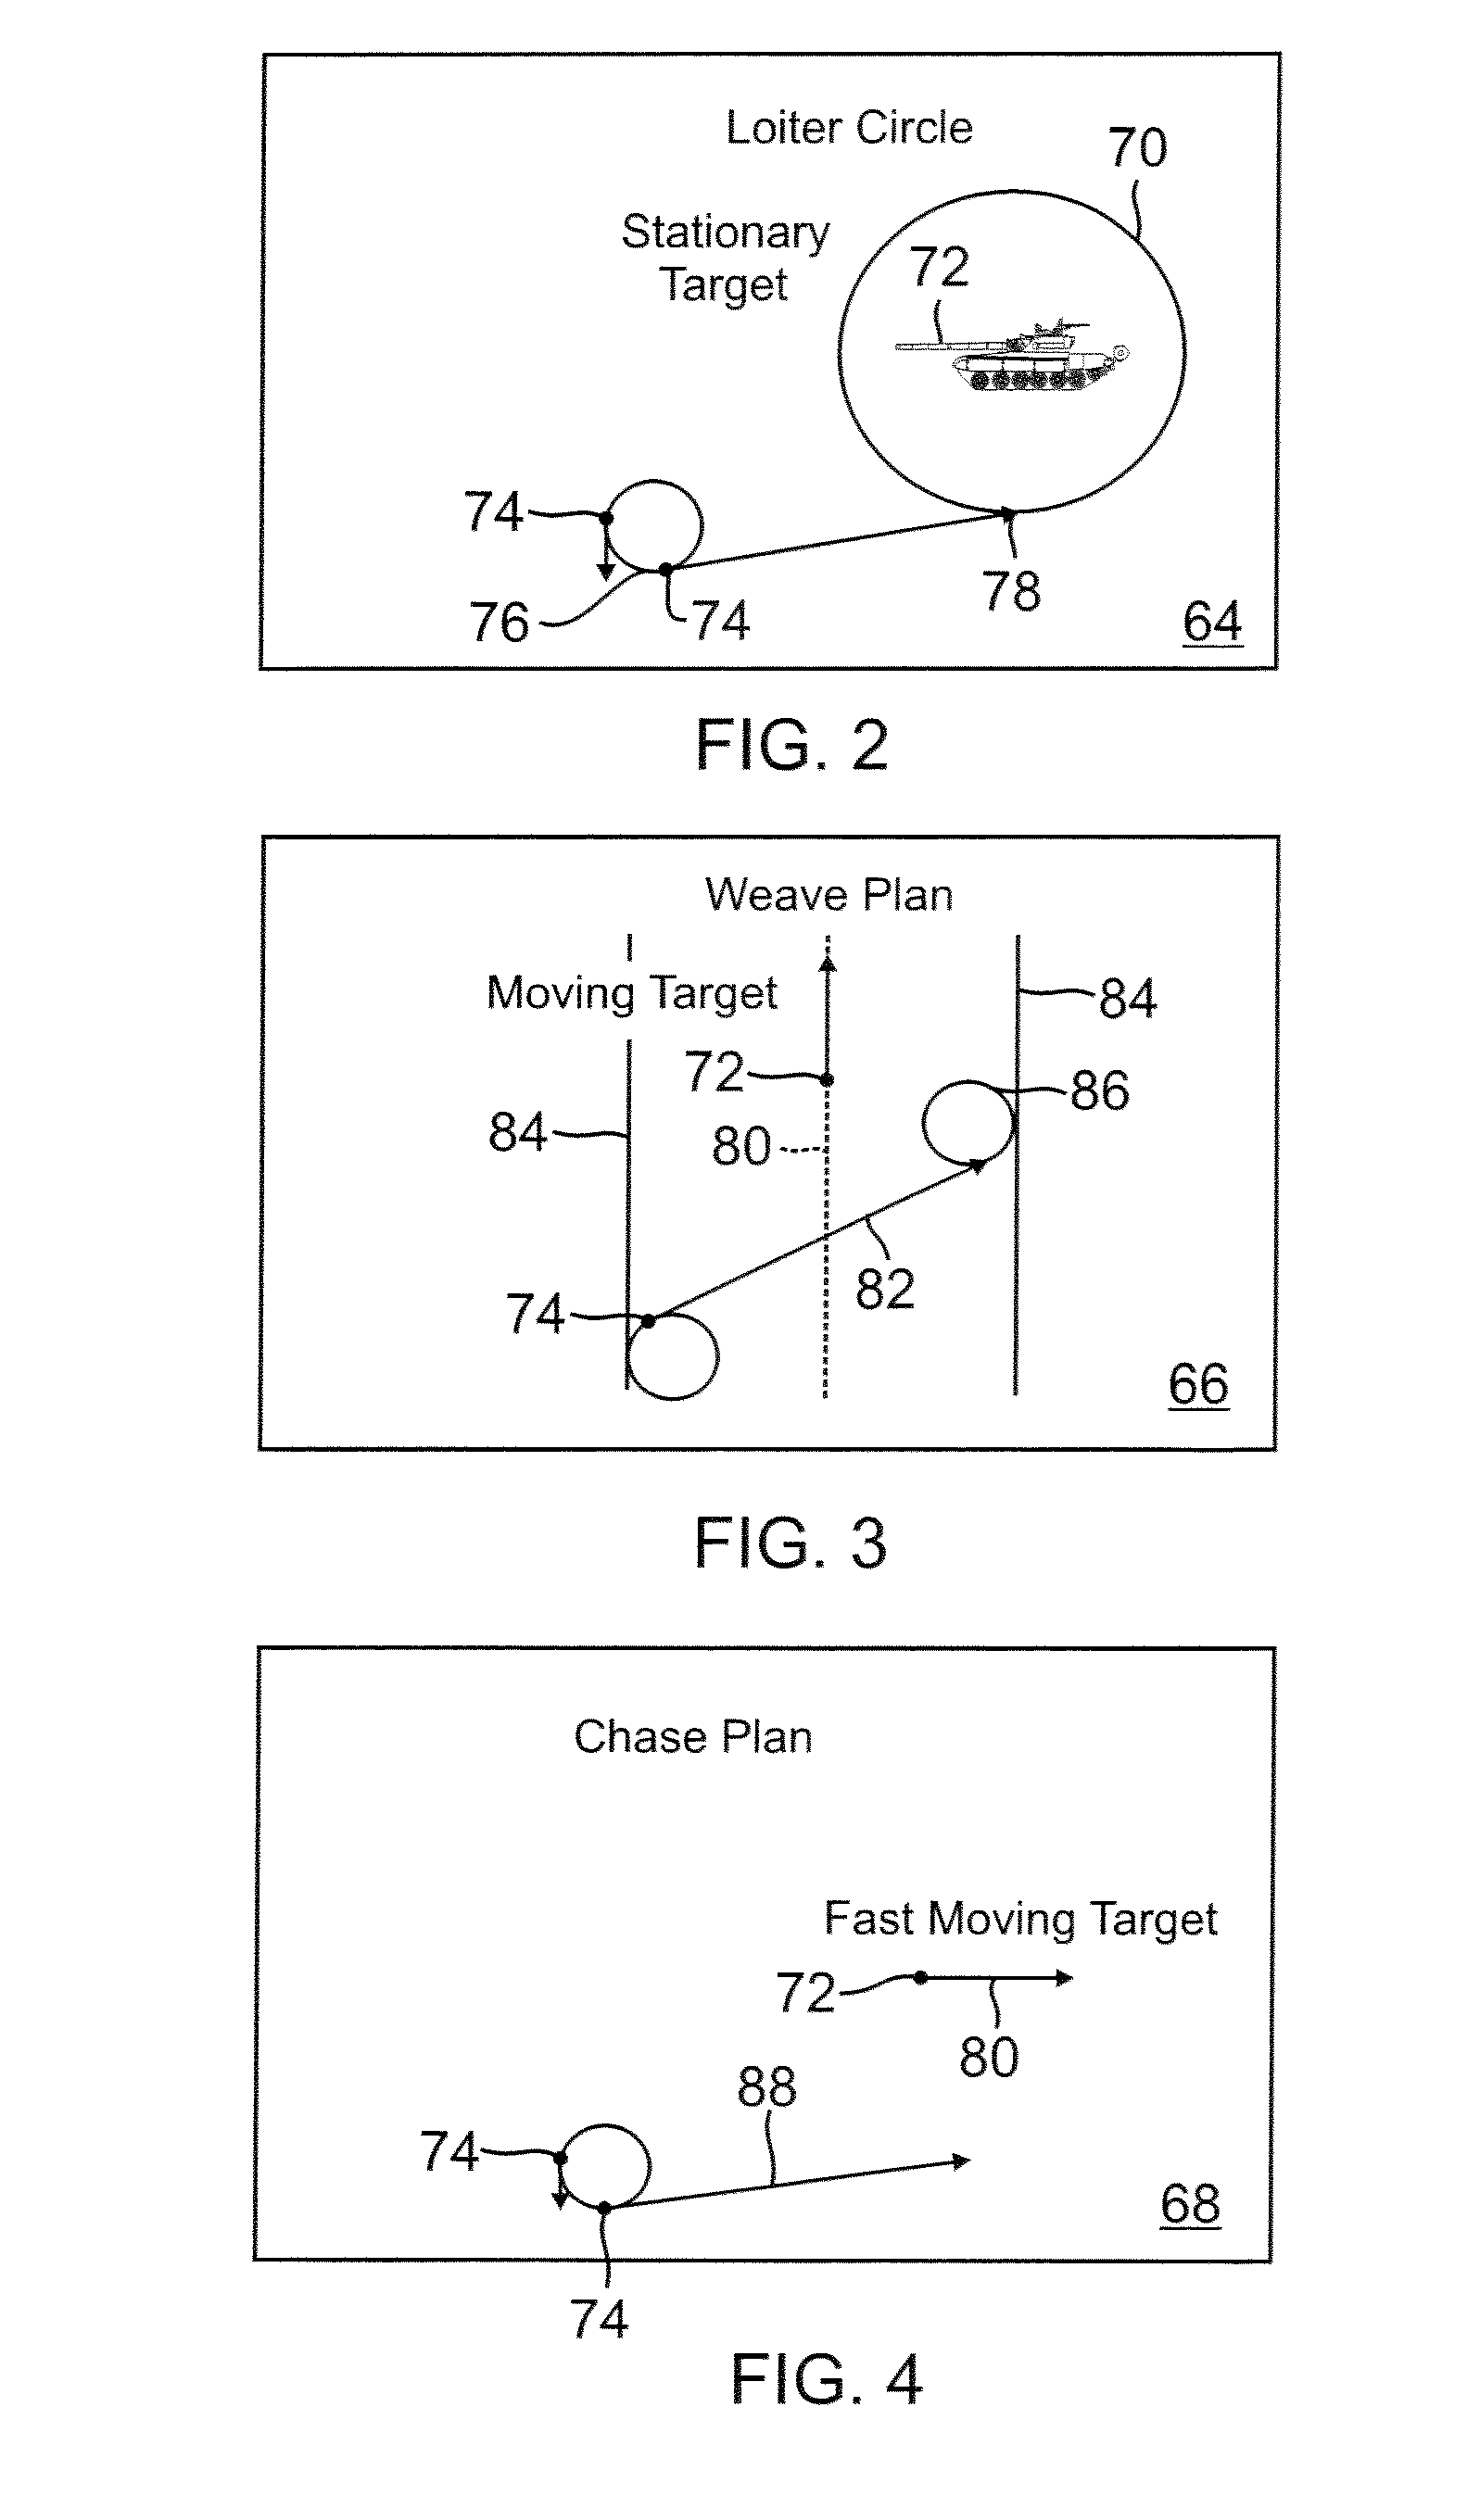 System and methods for autonomous tracking and surveillance